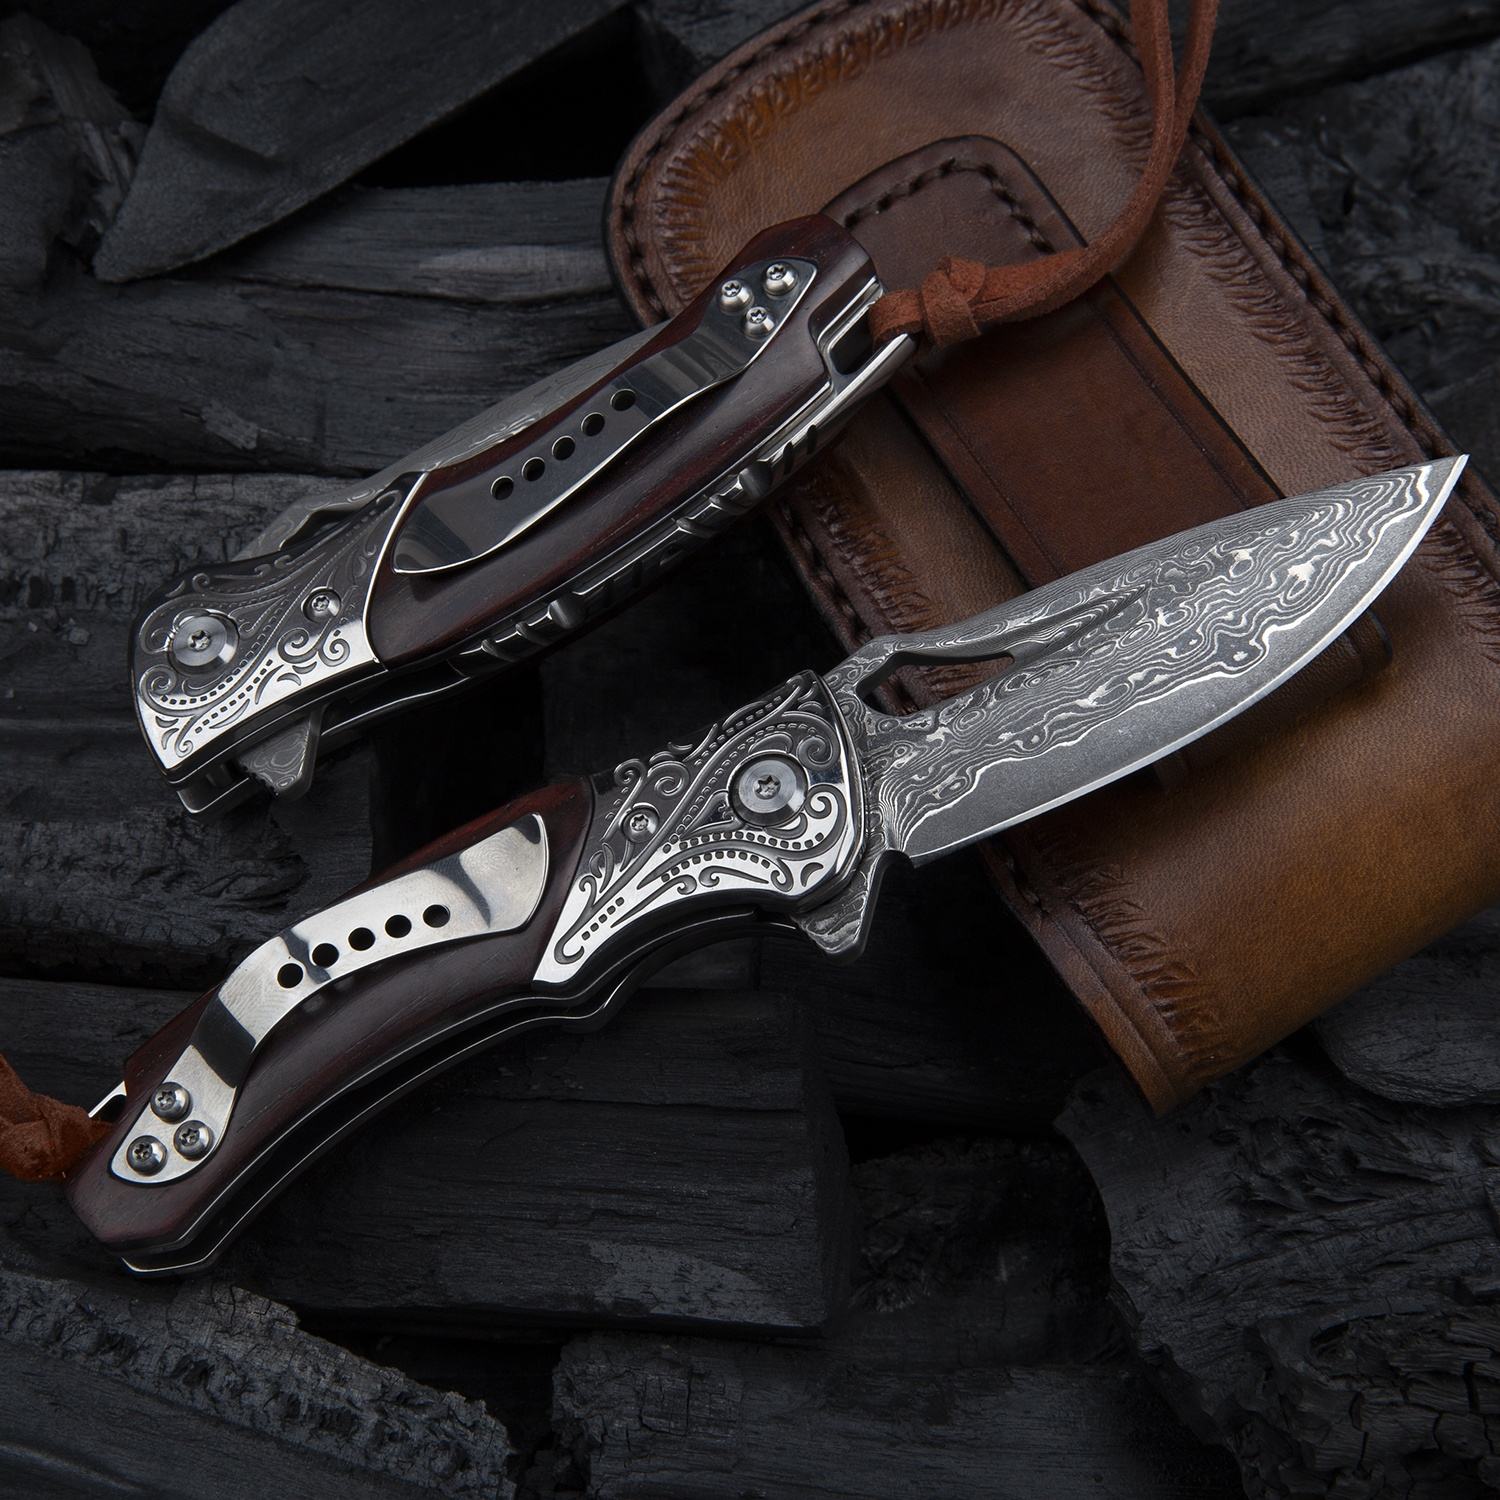 Rosewood Damascus Steel Knife with Clip